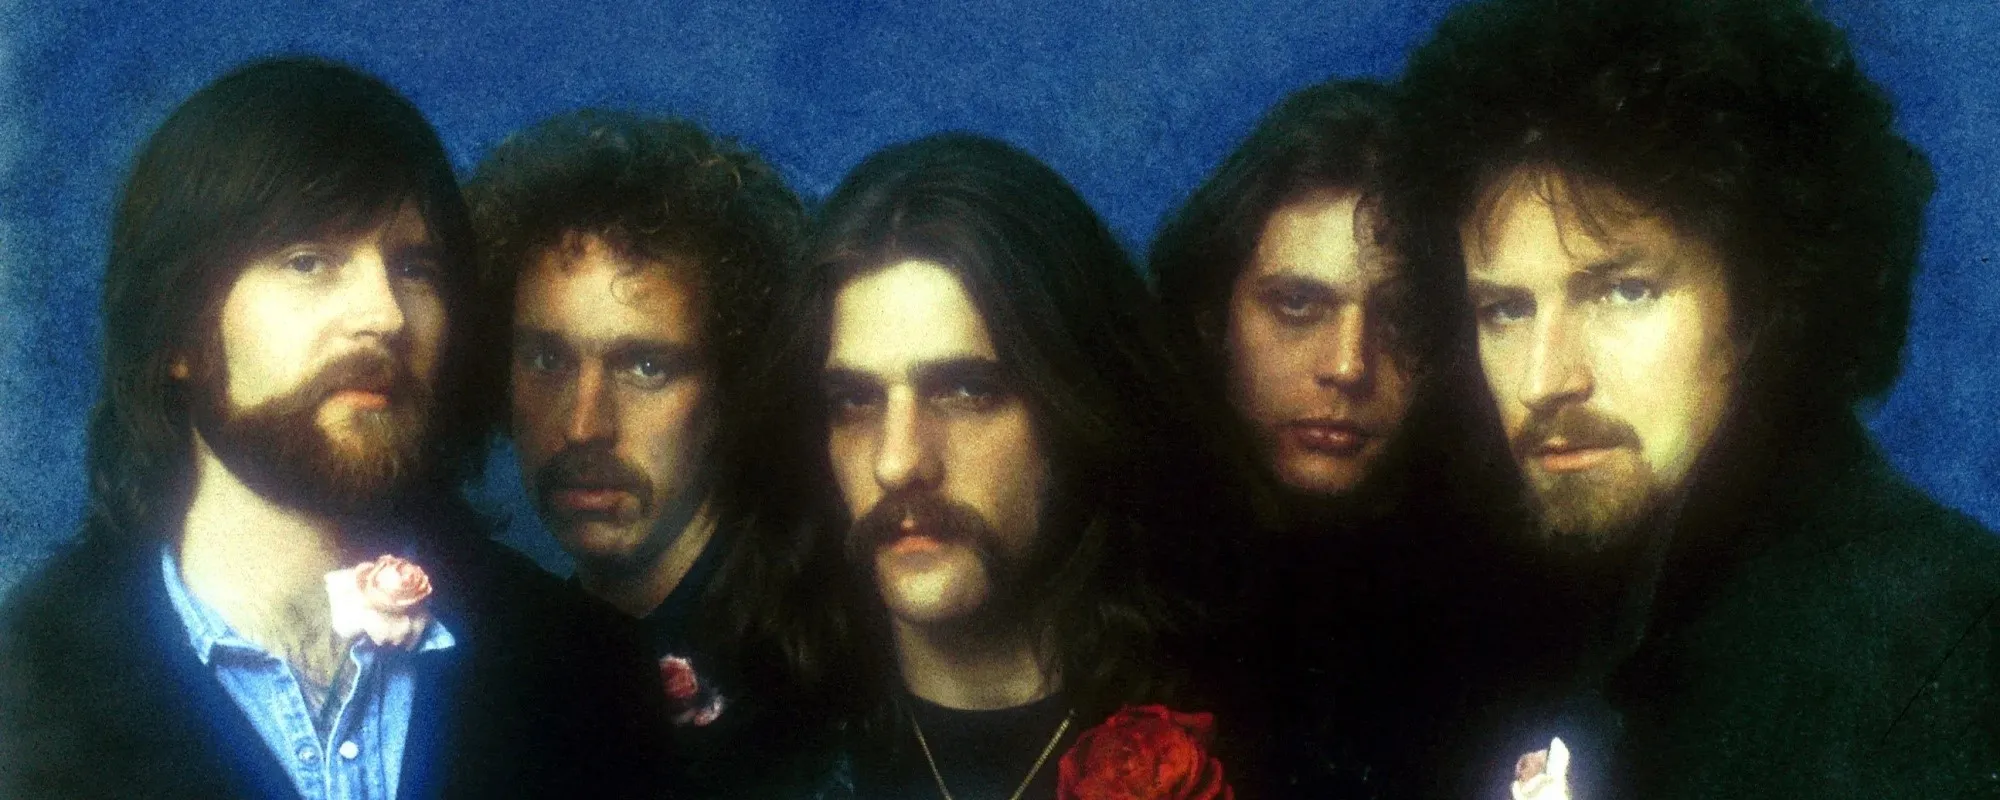 Why the Eagles Disliked The Compilation Album, ‘Greatest Hits Volume 2’